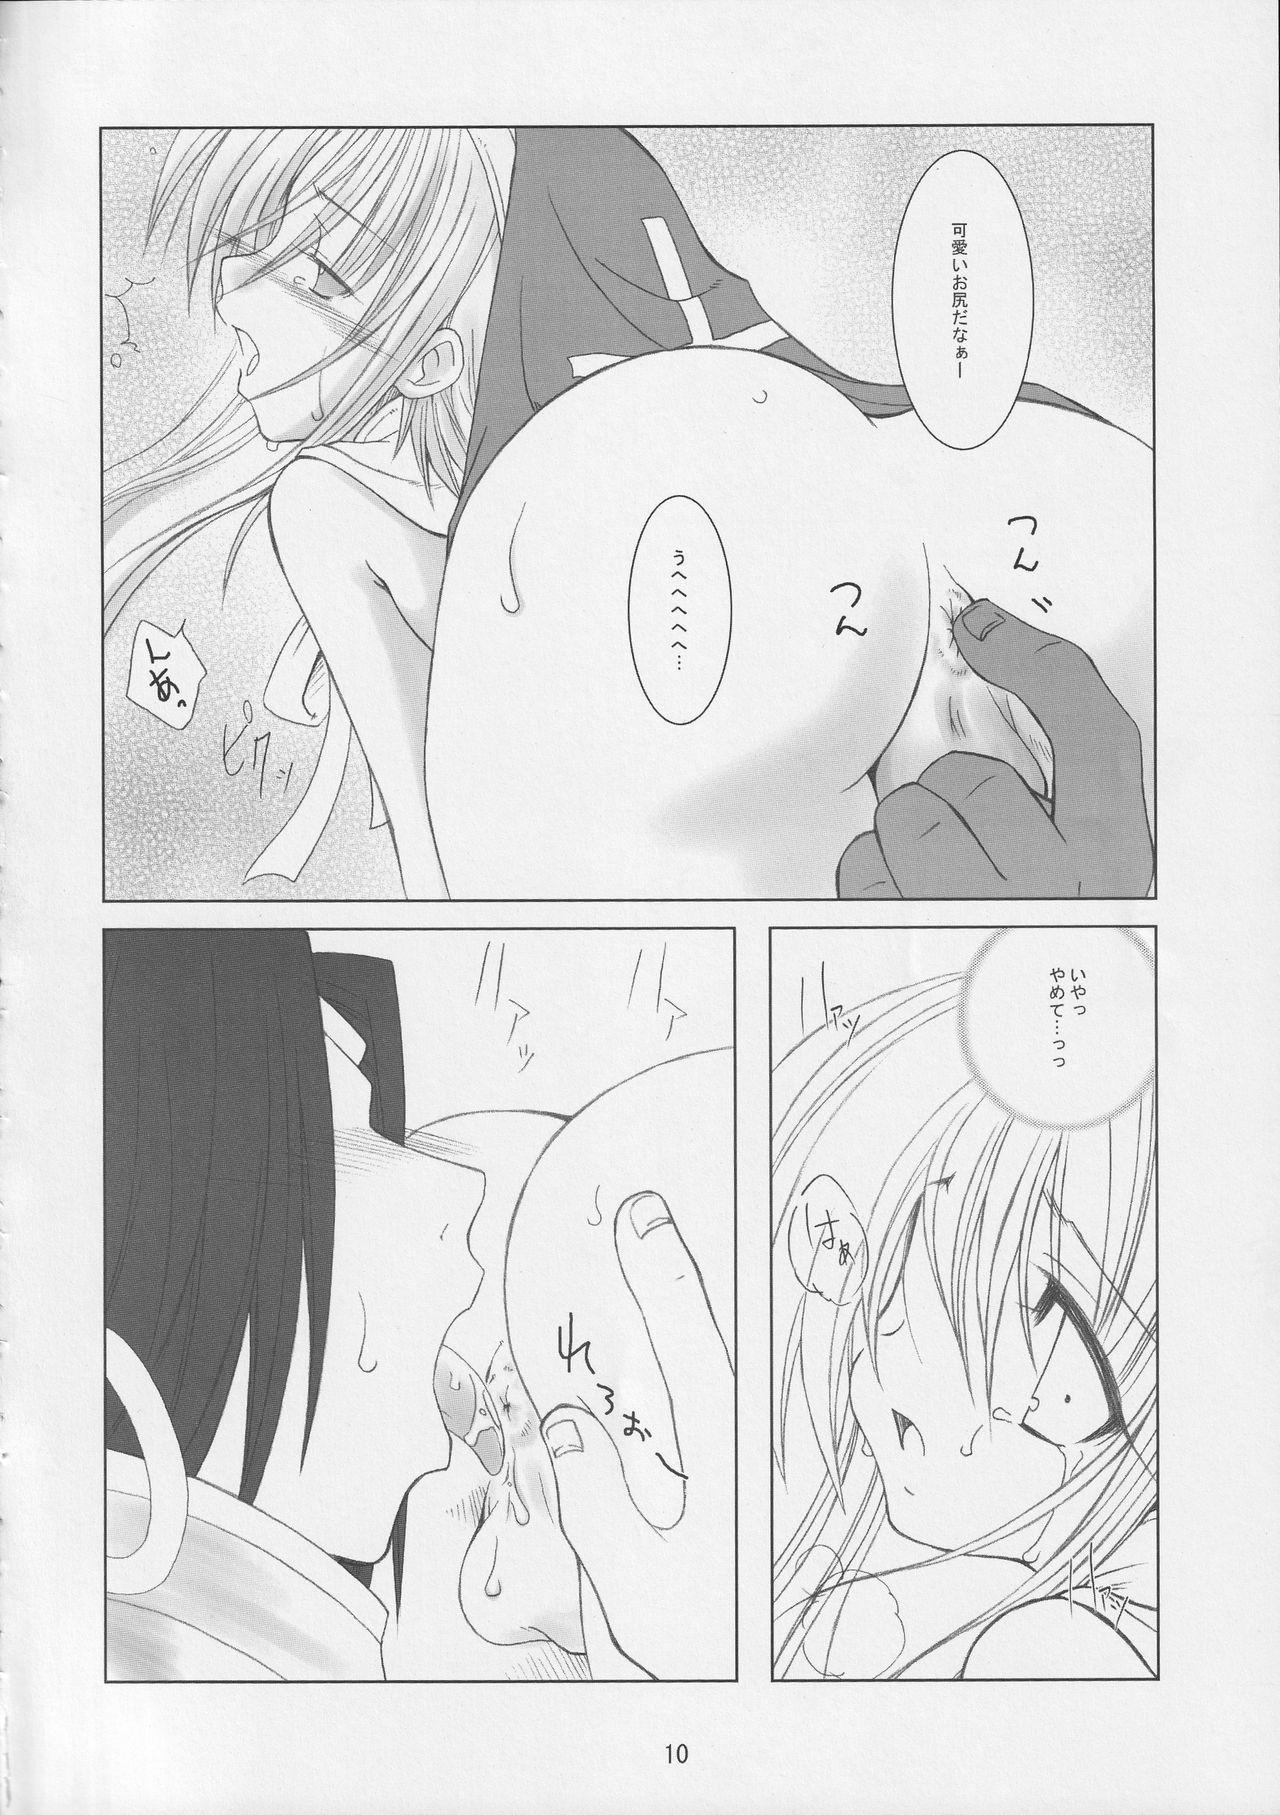 Exgf KICK START MY HEART !! - Guilty gear Naked - Page 9